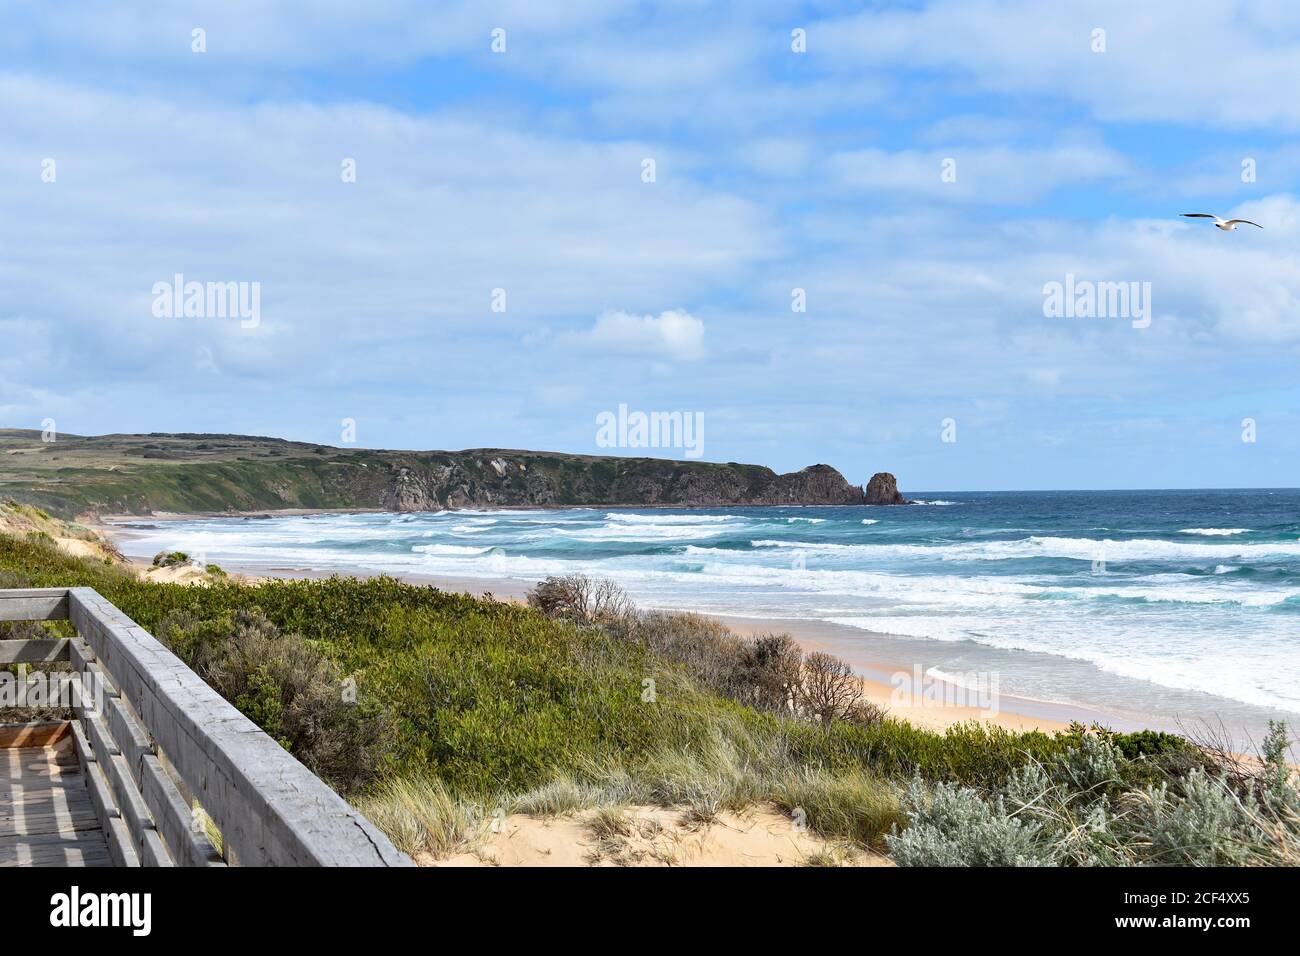 A small section of the wooden boardwalk on Cape Woolamai Beach.  Grass grows along the edges of the golden sand beach as wave crash from the blue sea. Stock Photo